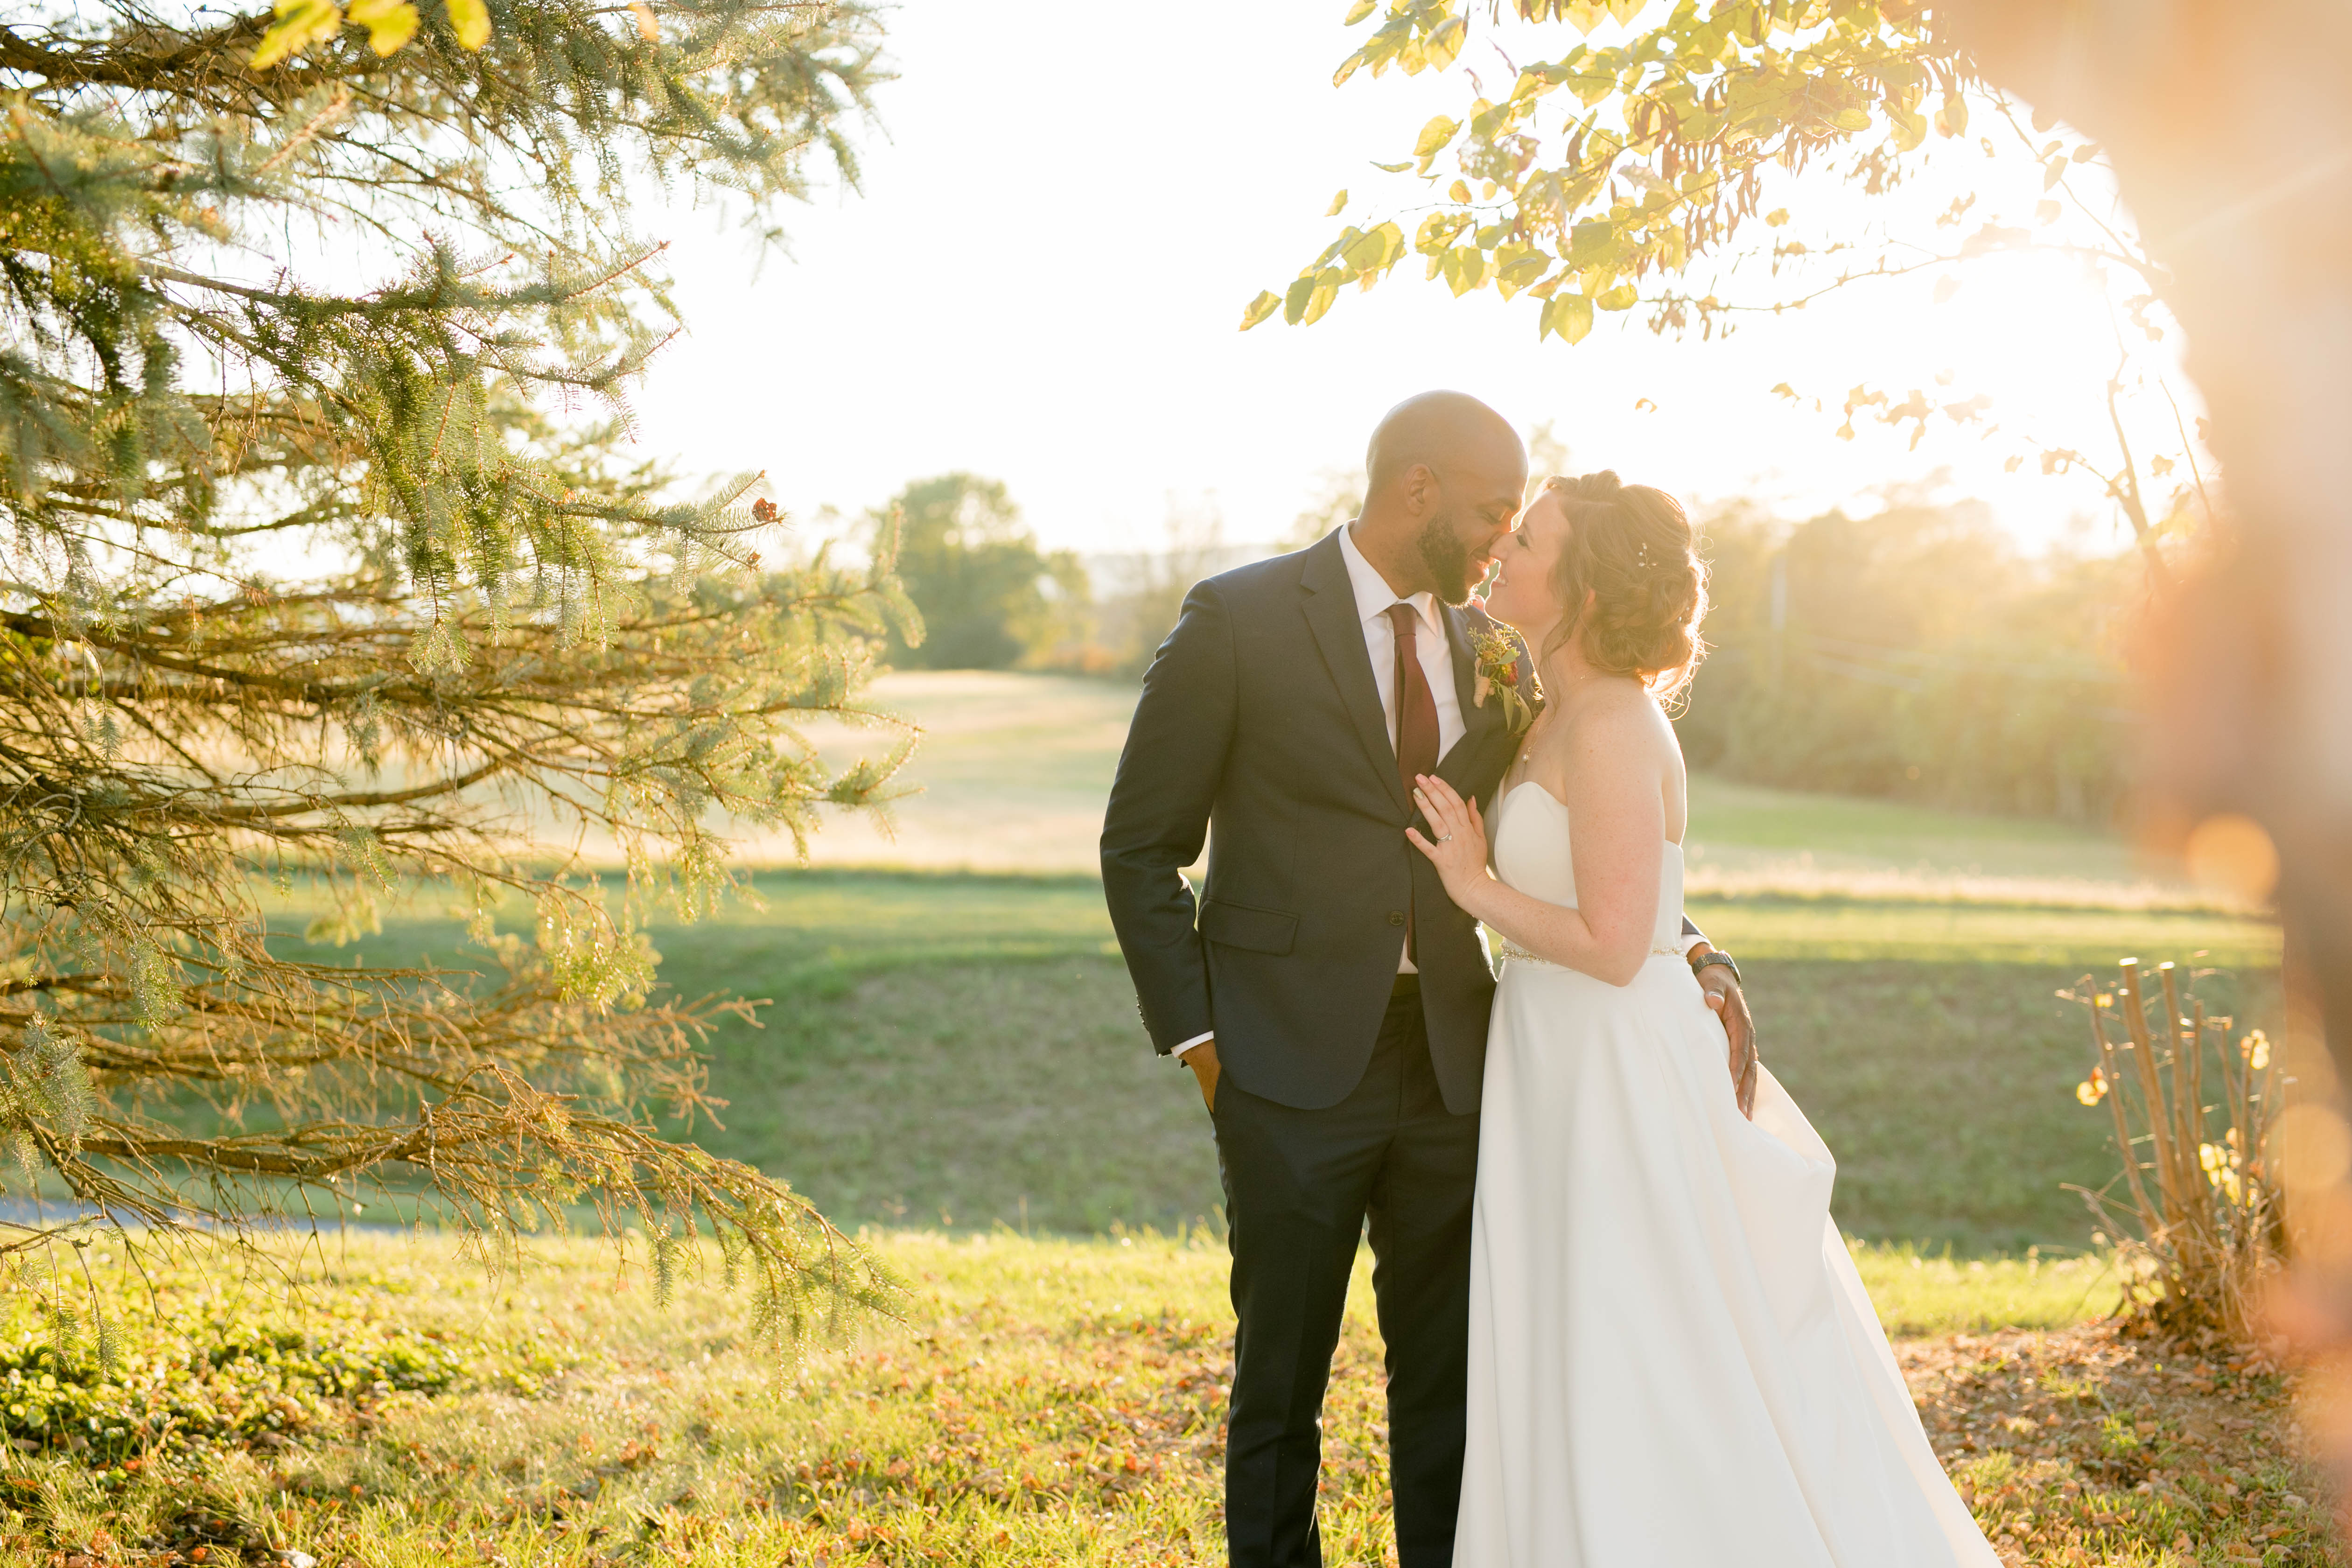 Heartwarming Fall Mountaintop Church Wedding at Holy Family Catholic Church in MIddletown, Maryland